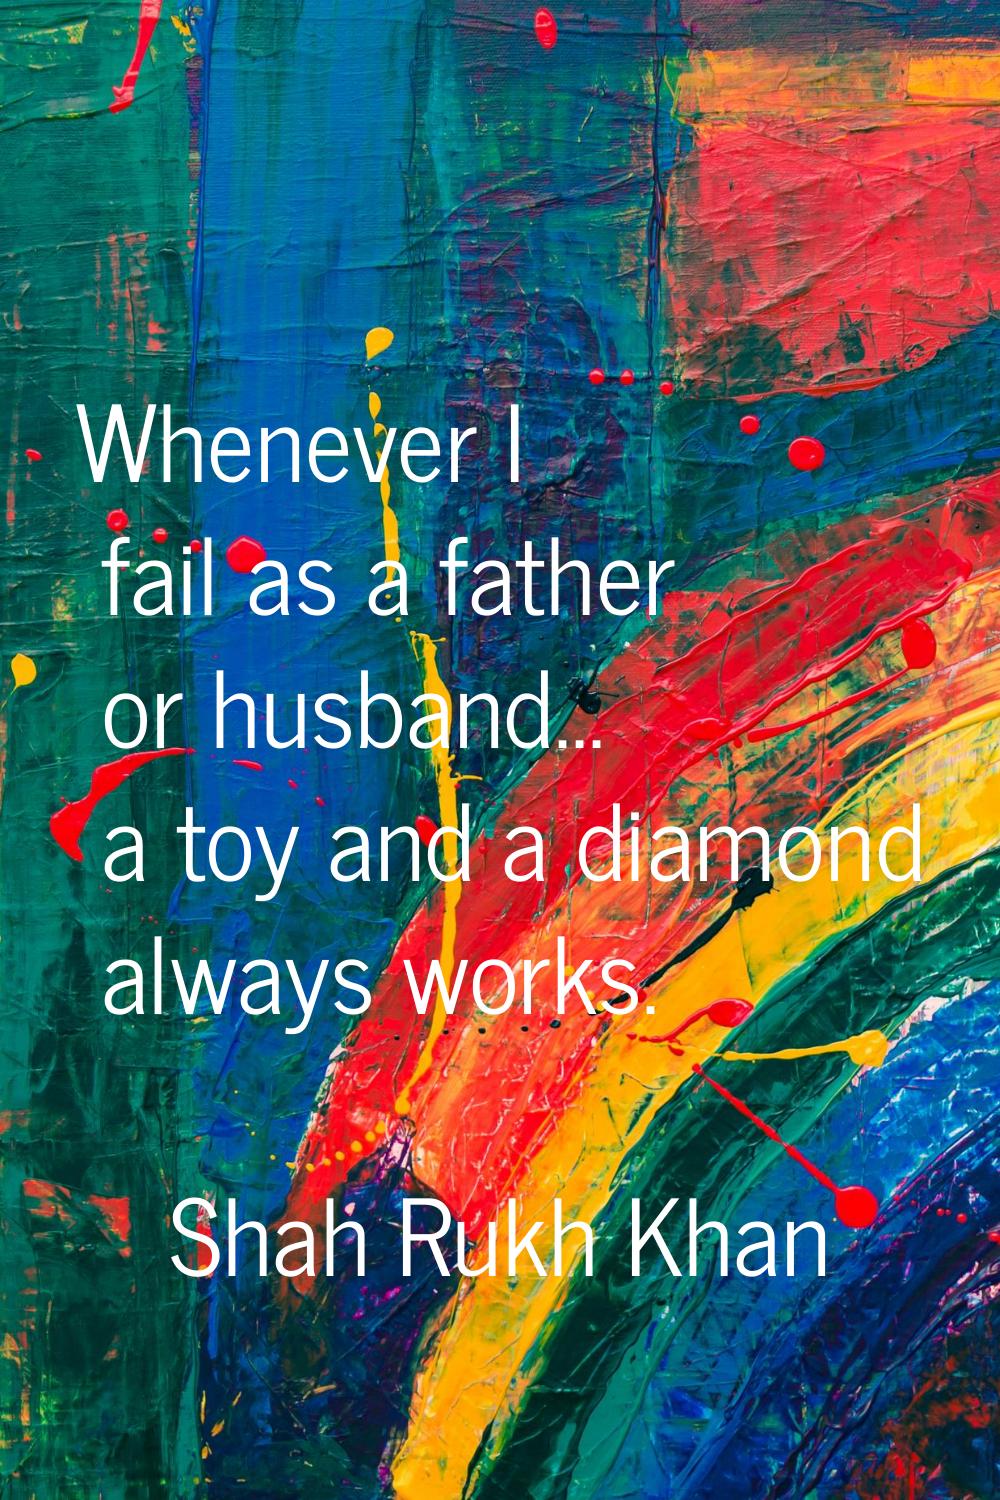 Whenever I fail as a father or husband... a toy and a diamond always works.